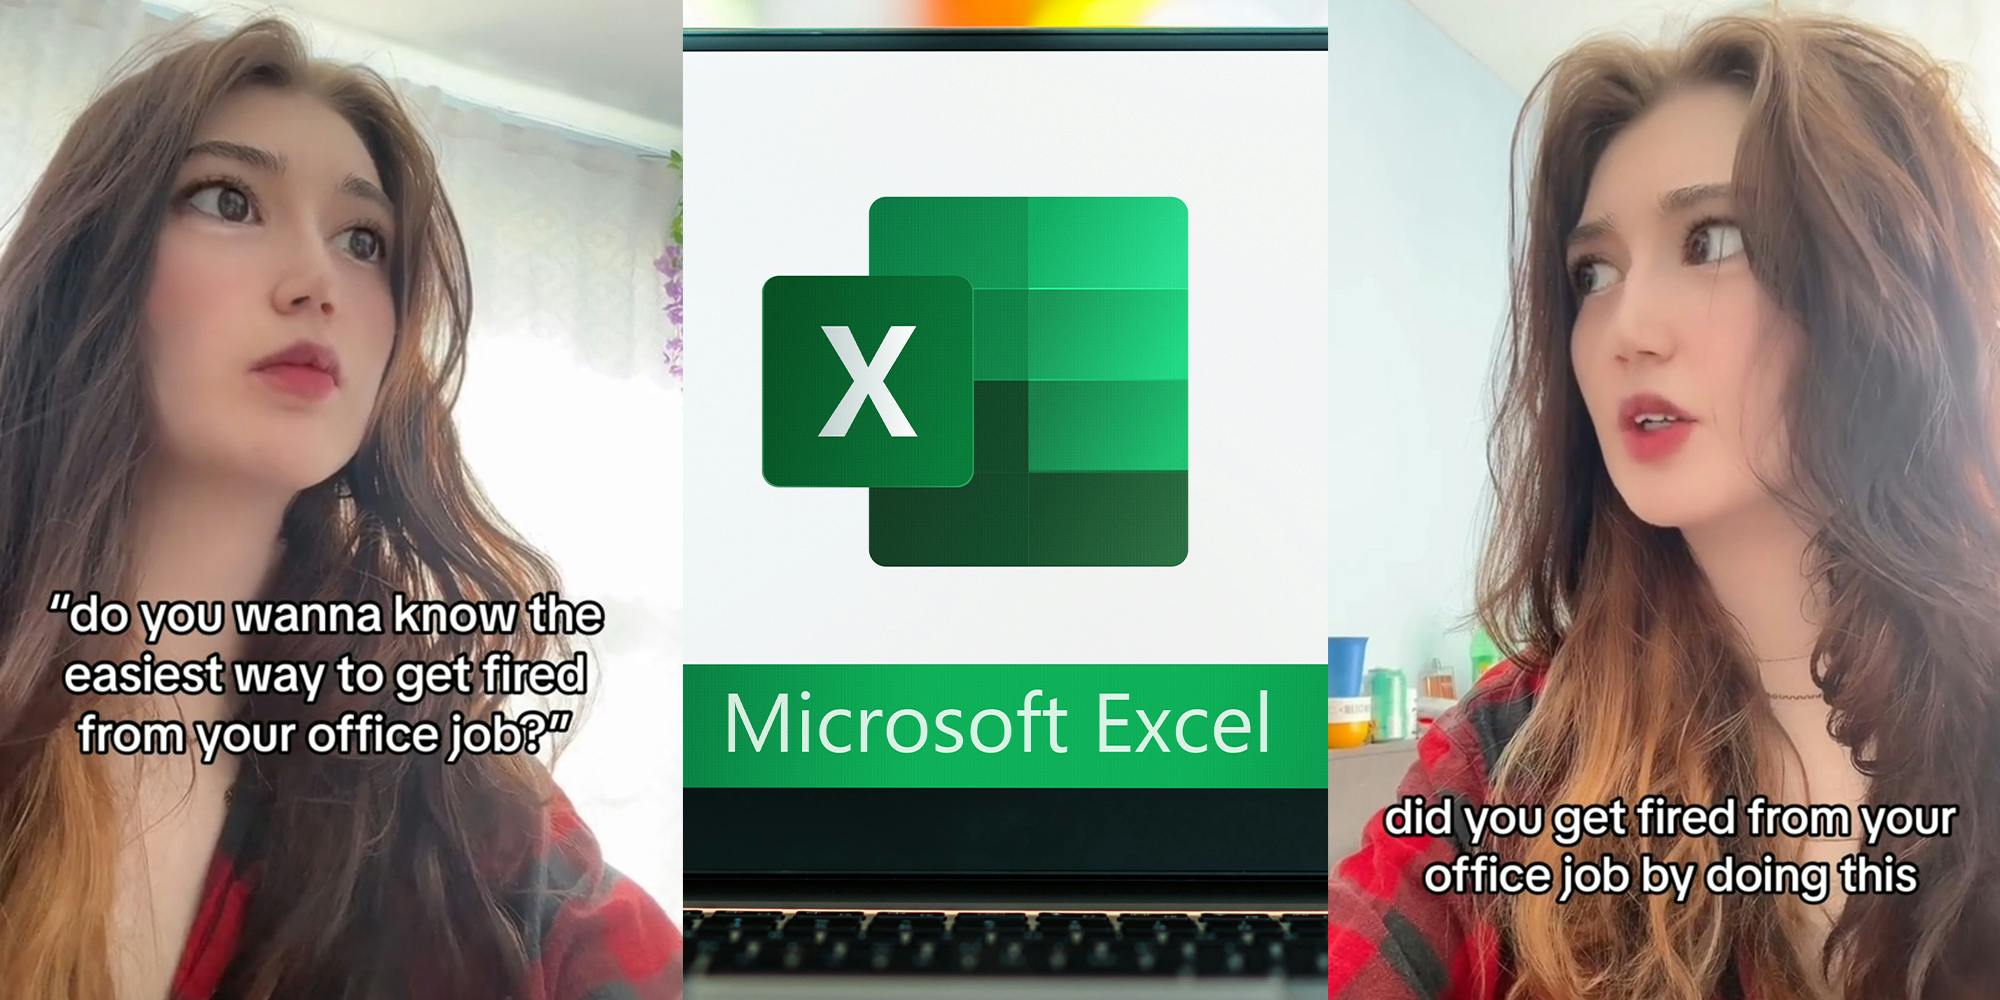 Employee shares secret Microsoft Excel hack for how to get fired from your office job